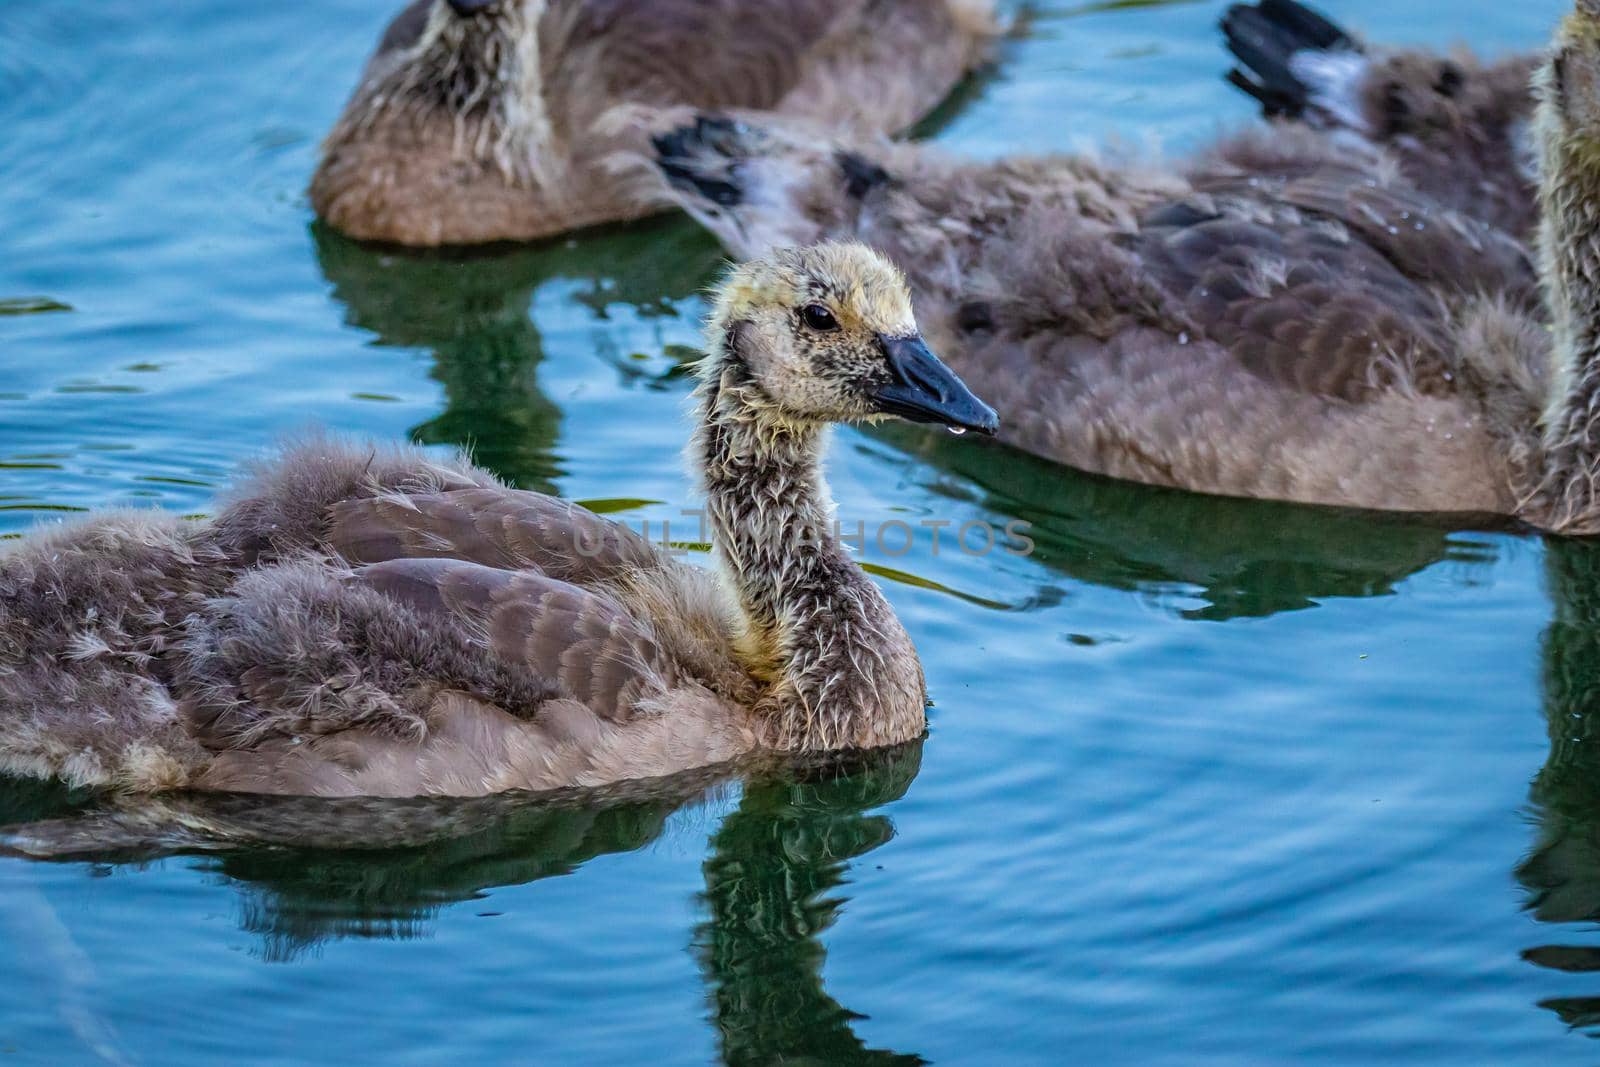 A group of young grey Canada geese swiming in lake